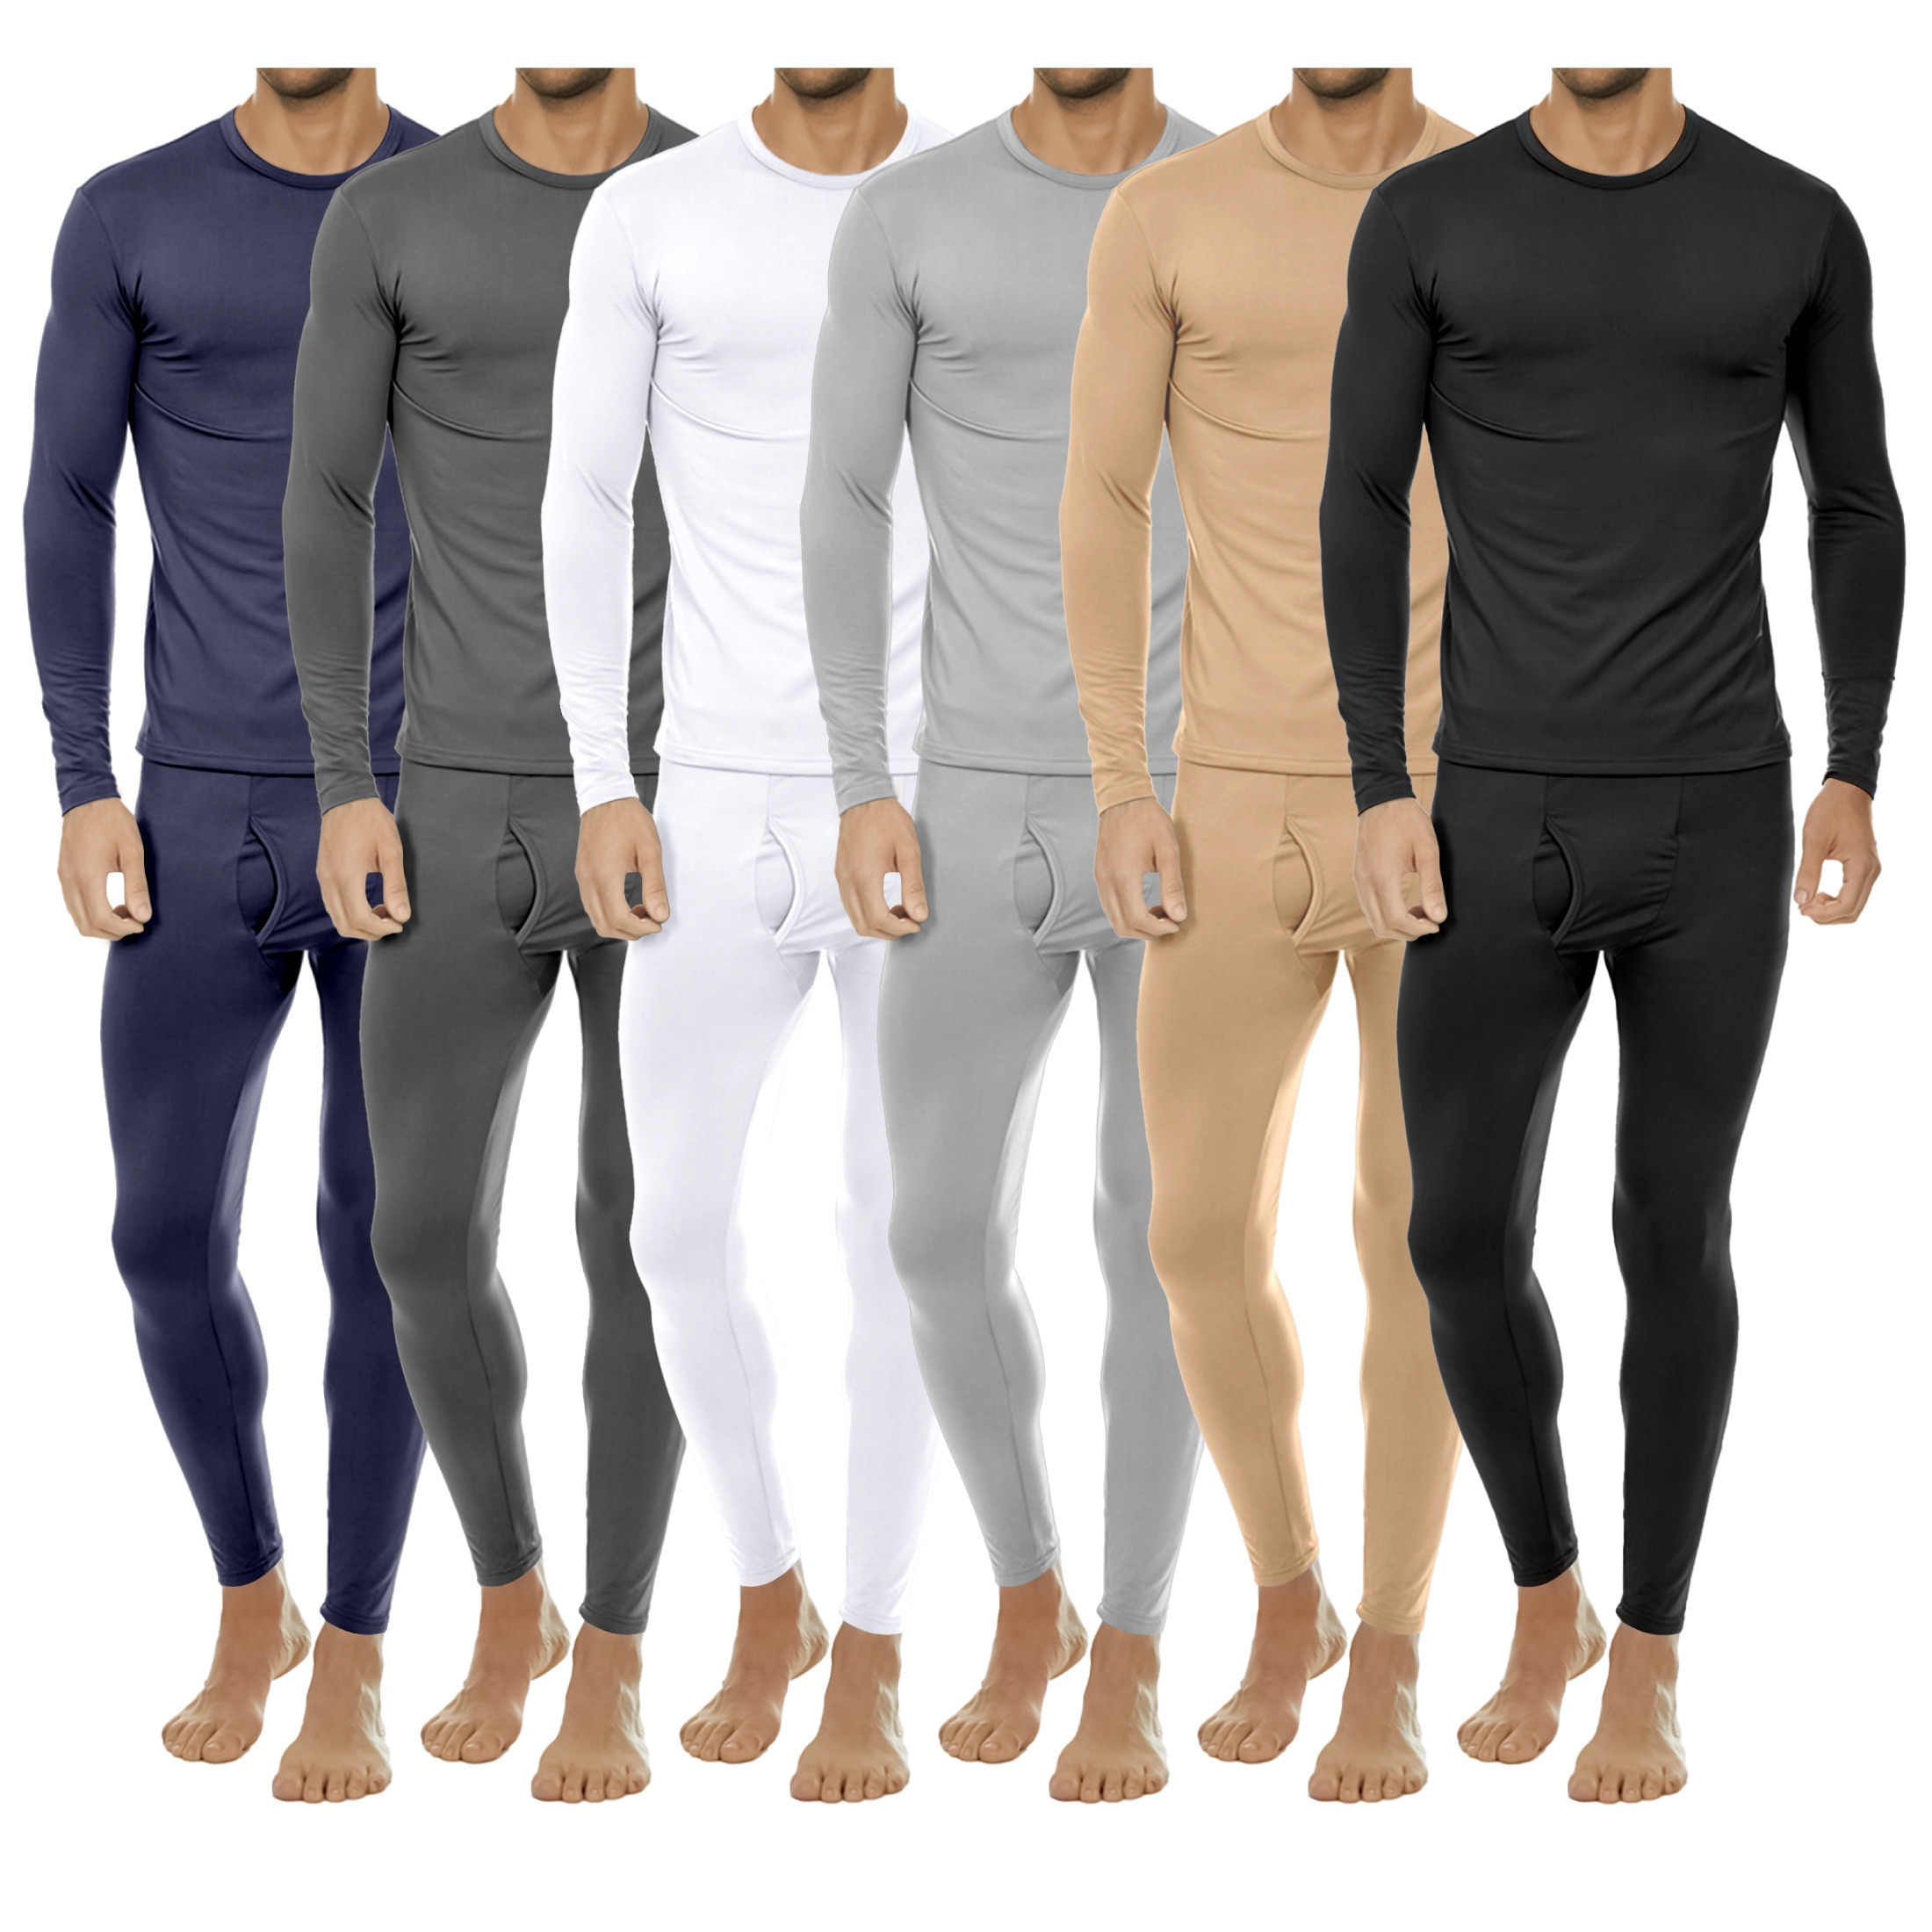 4-Piece: Men's Fleece Lined Thermal Set For Cold Weather - Large